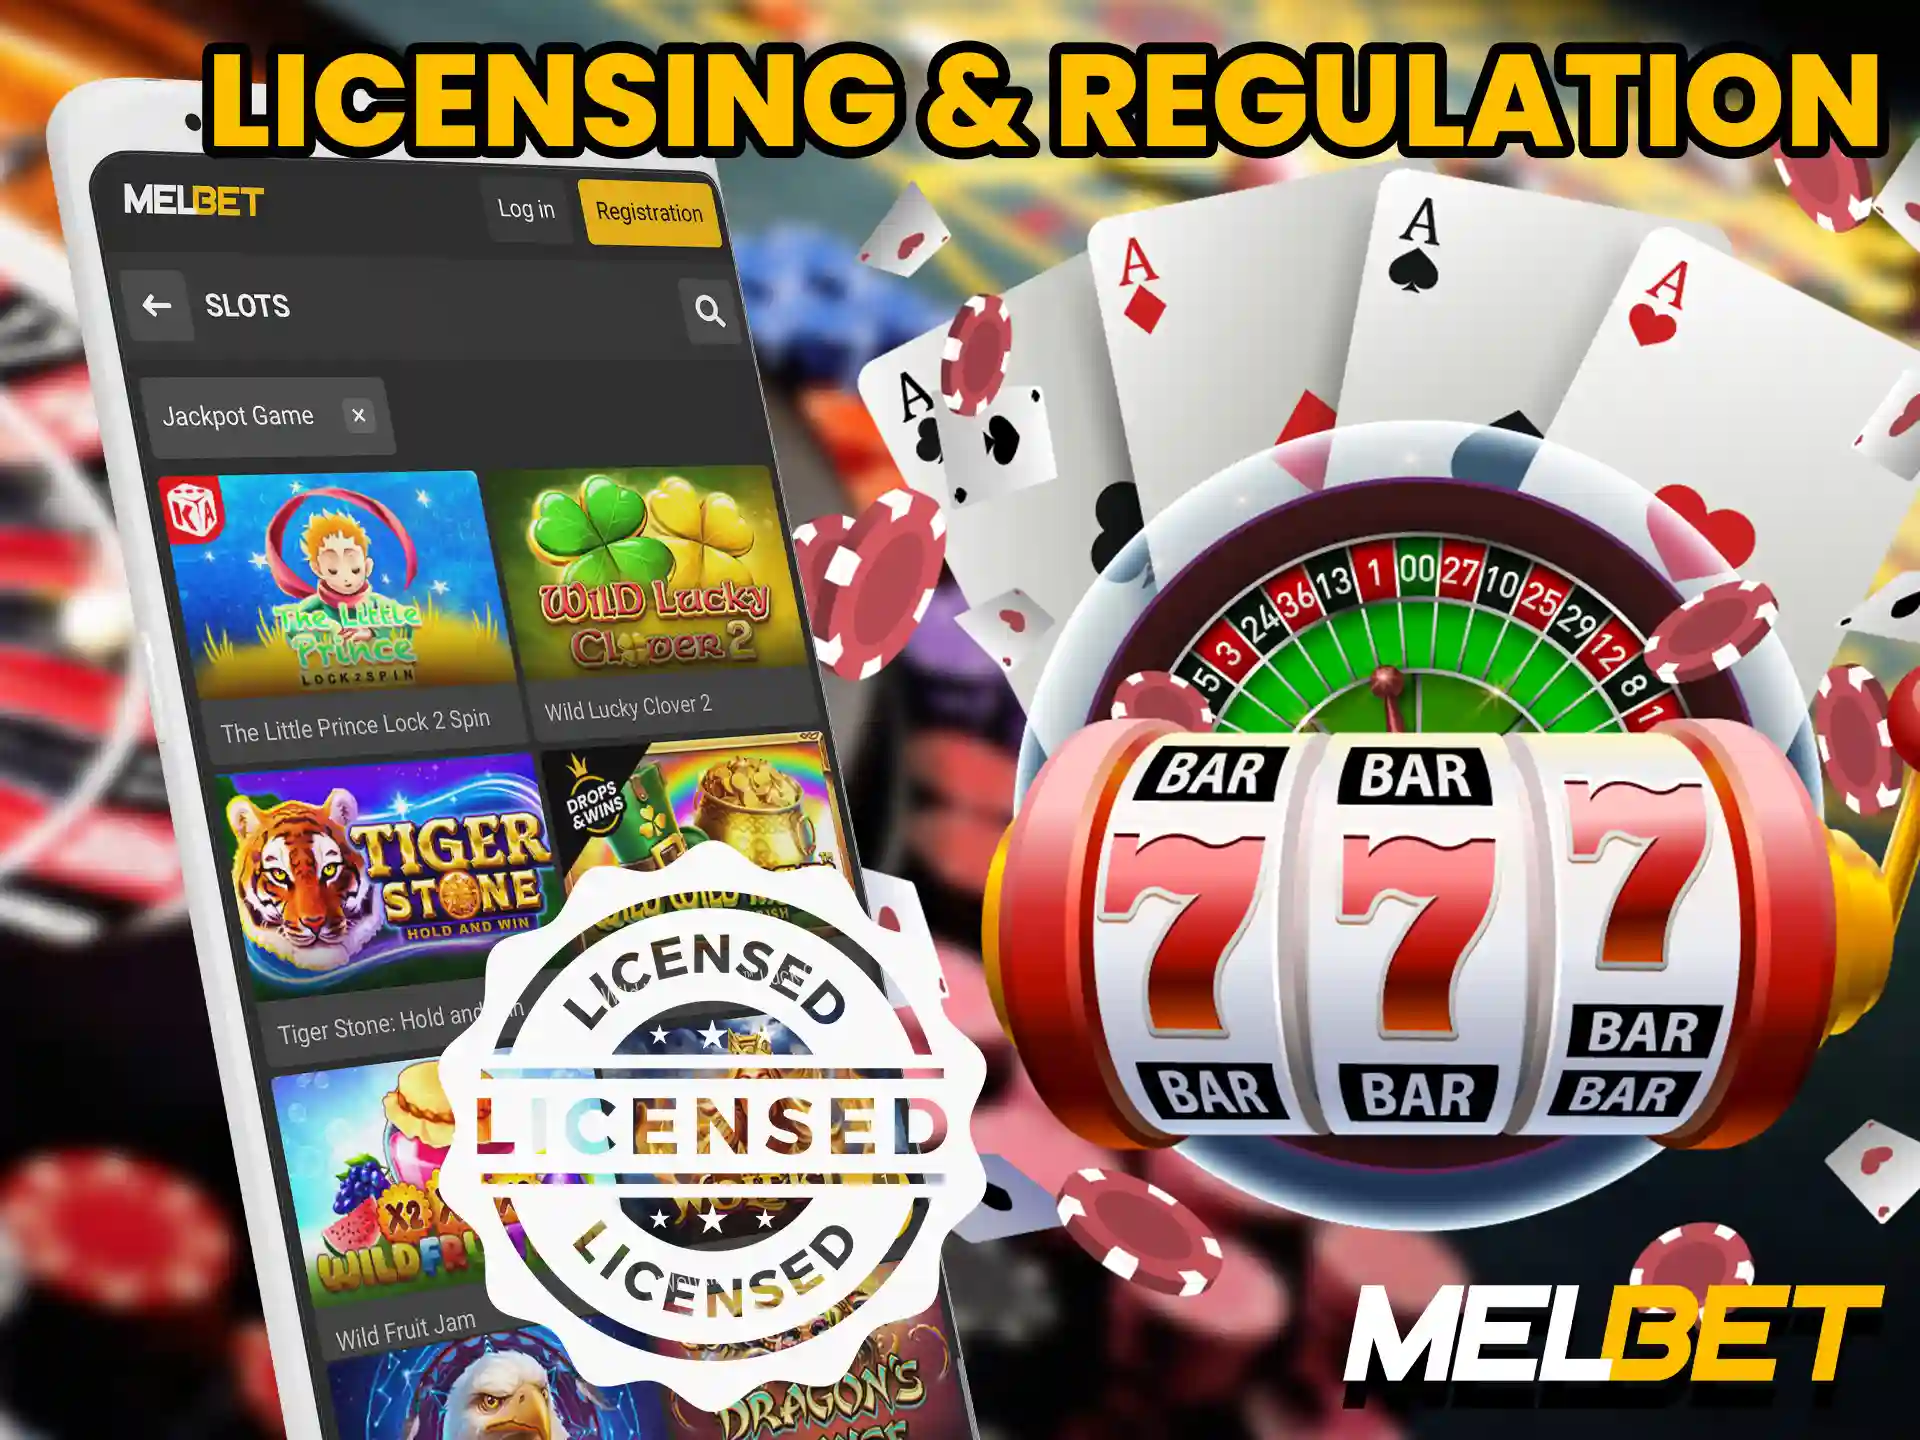 Melbet is fully licensed which confirms the honesty of the casino.